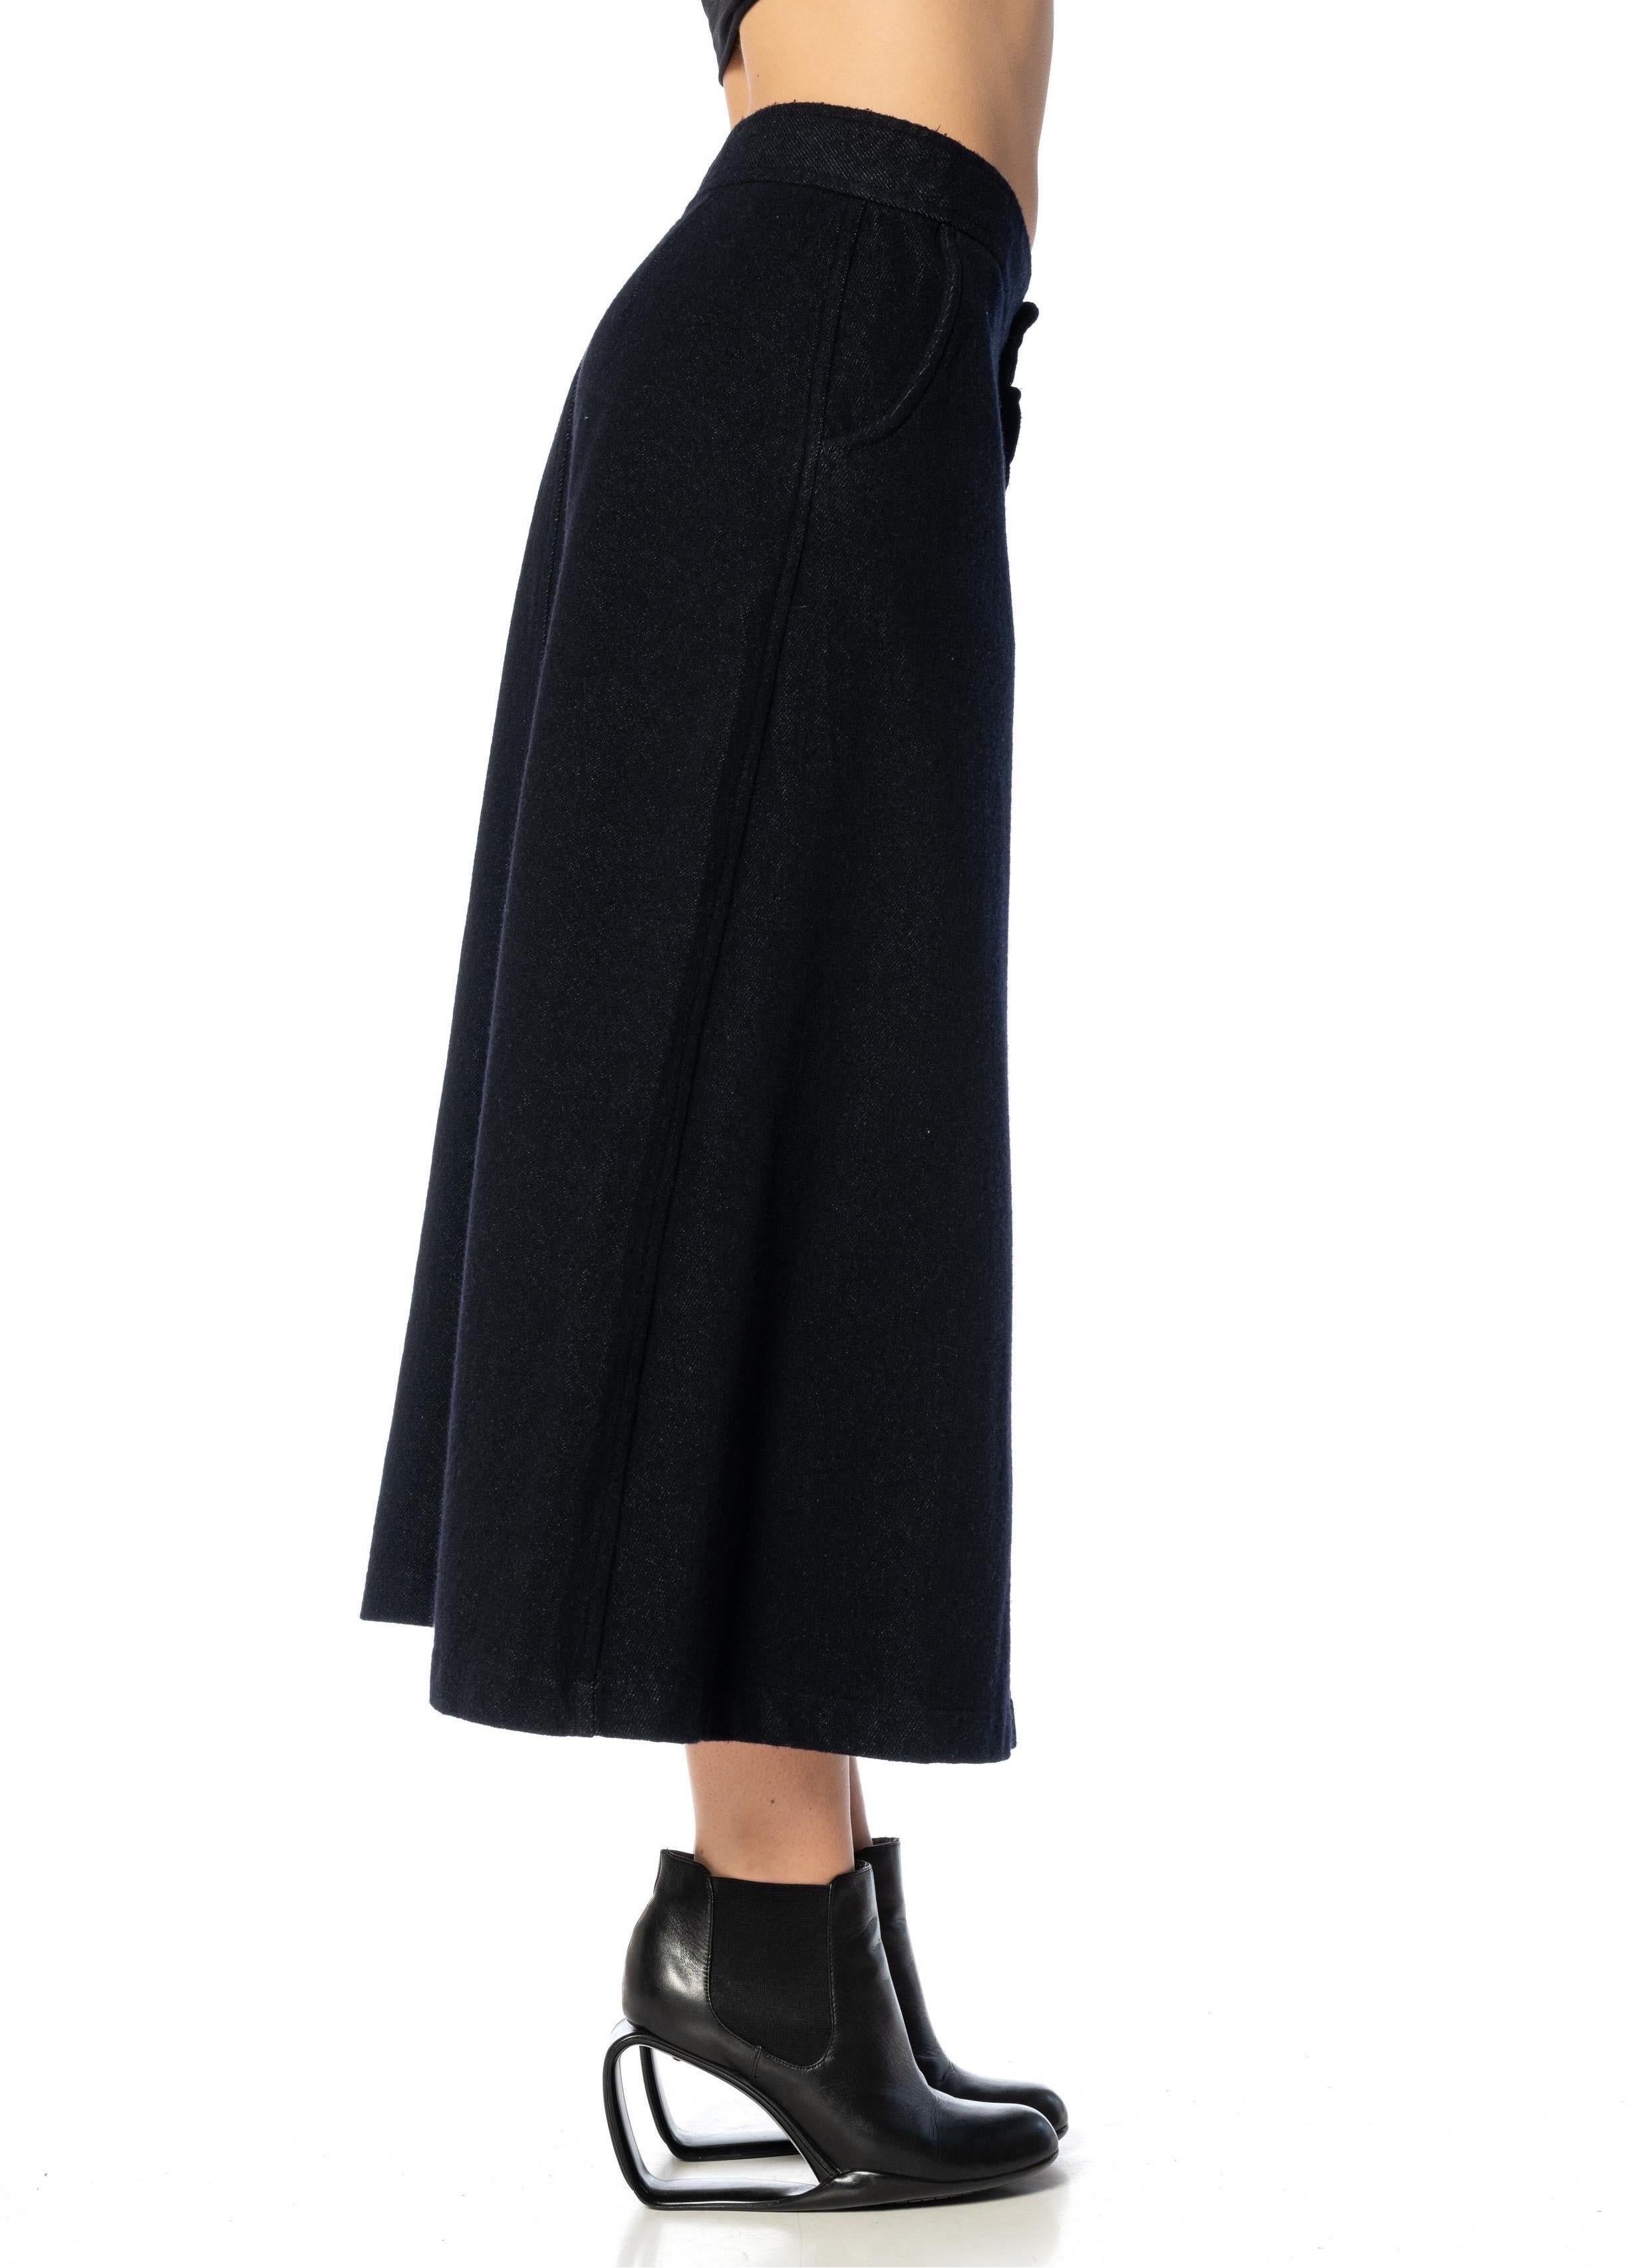 Women's 2000S COMME DES GARCONS Wool & Cotton Denim Indigo Over-Dyed Low Hip Skirt For Sale